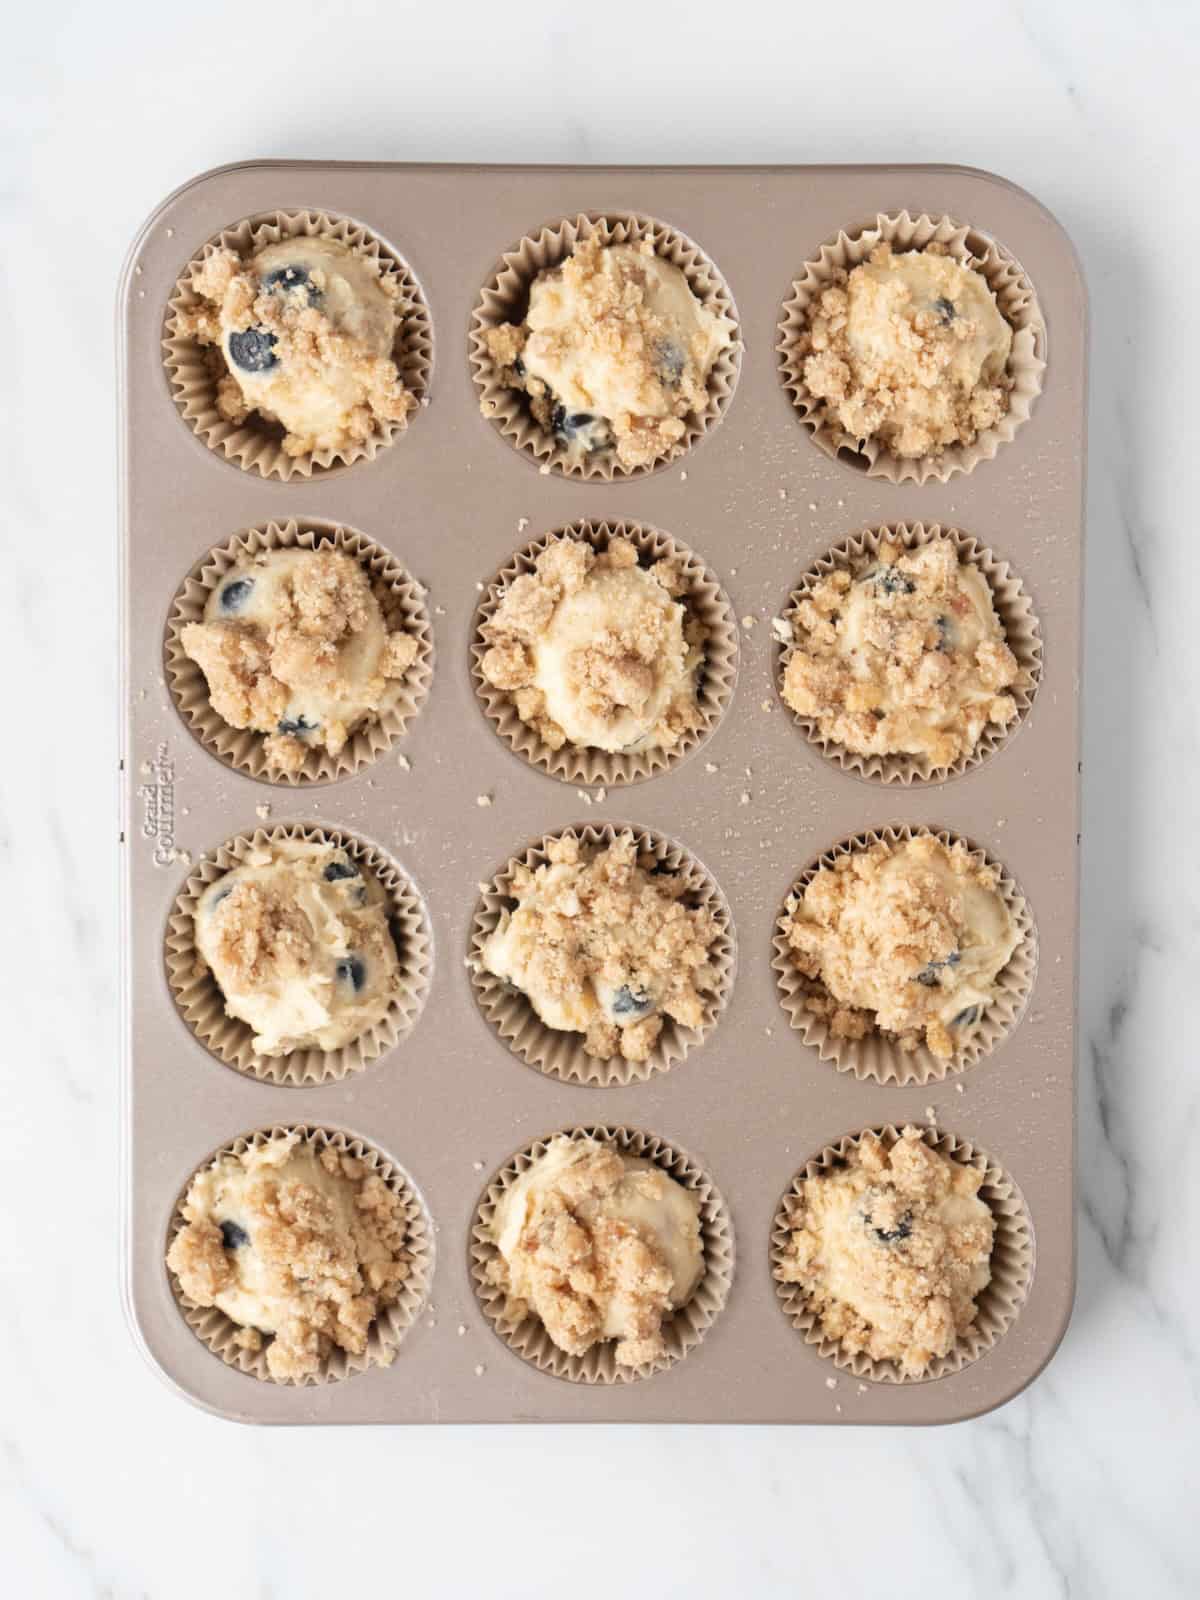 A cupcake baking pan lined with cupcake liners, filled with blueberry crumb muffin batter, topped with walnut streusel mixture.